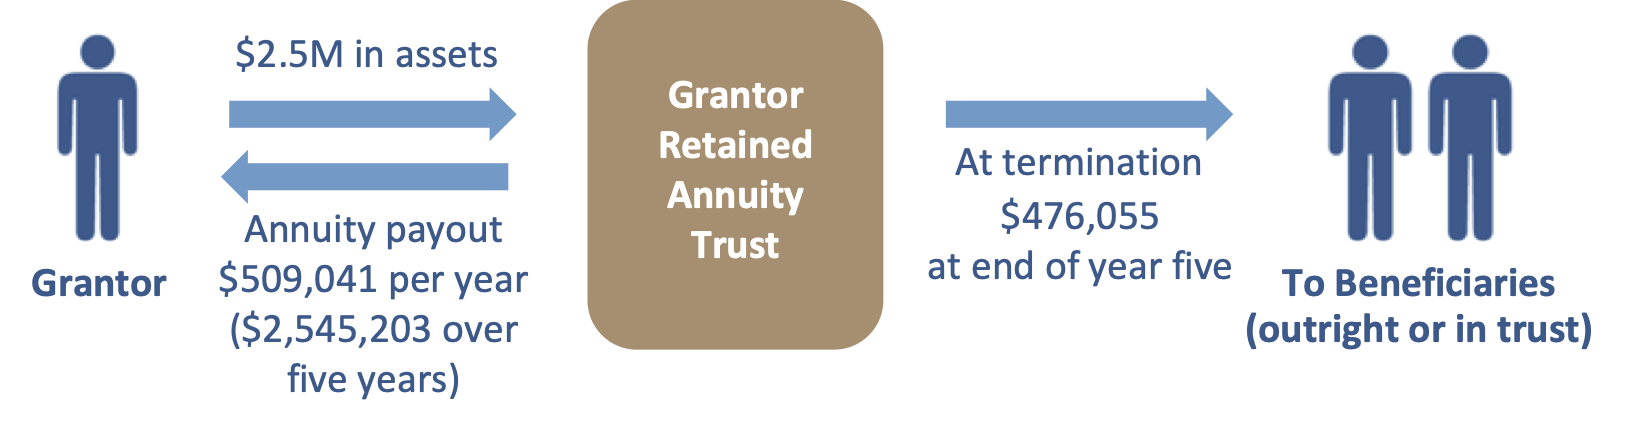 Grantor Retained Annuity Trust (July 2020)